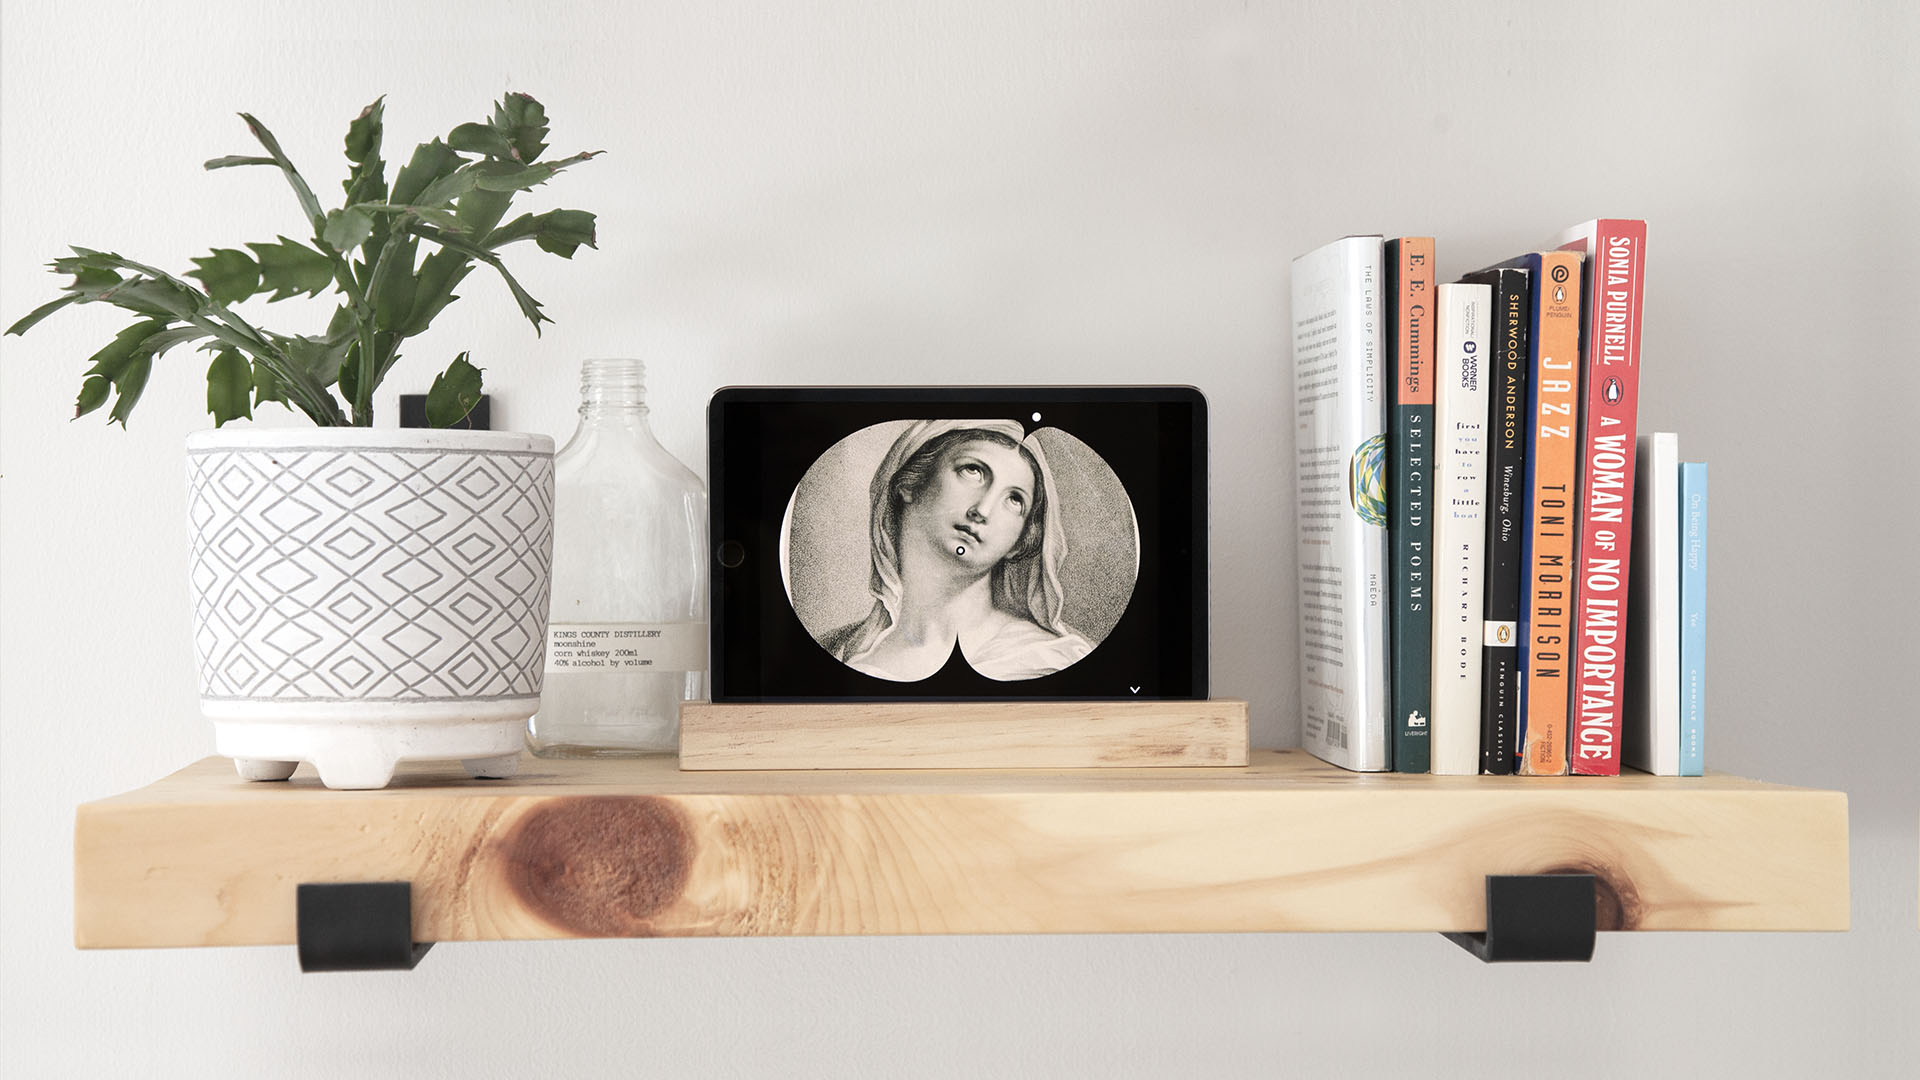 art clock displayed on a tablet resting on a shelf as part of decor